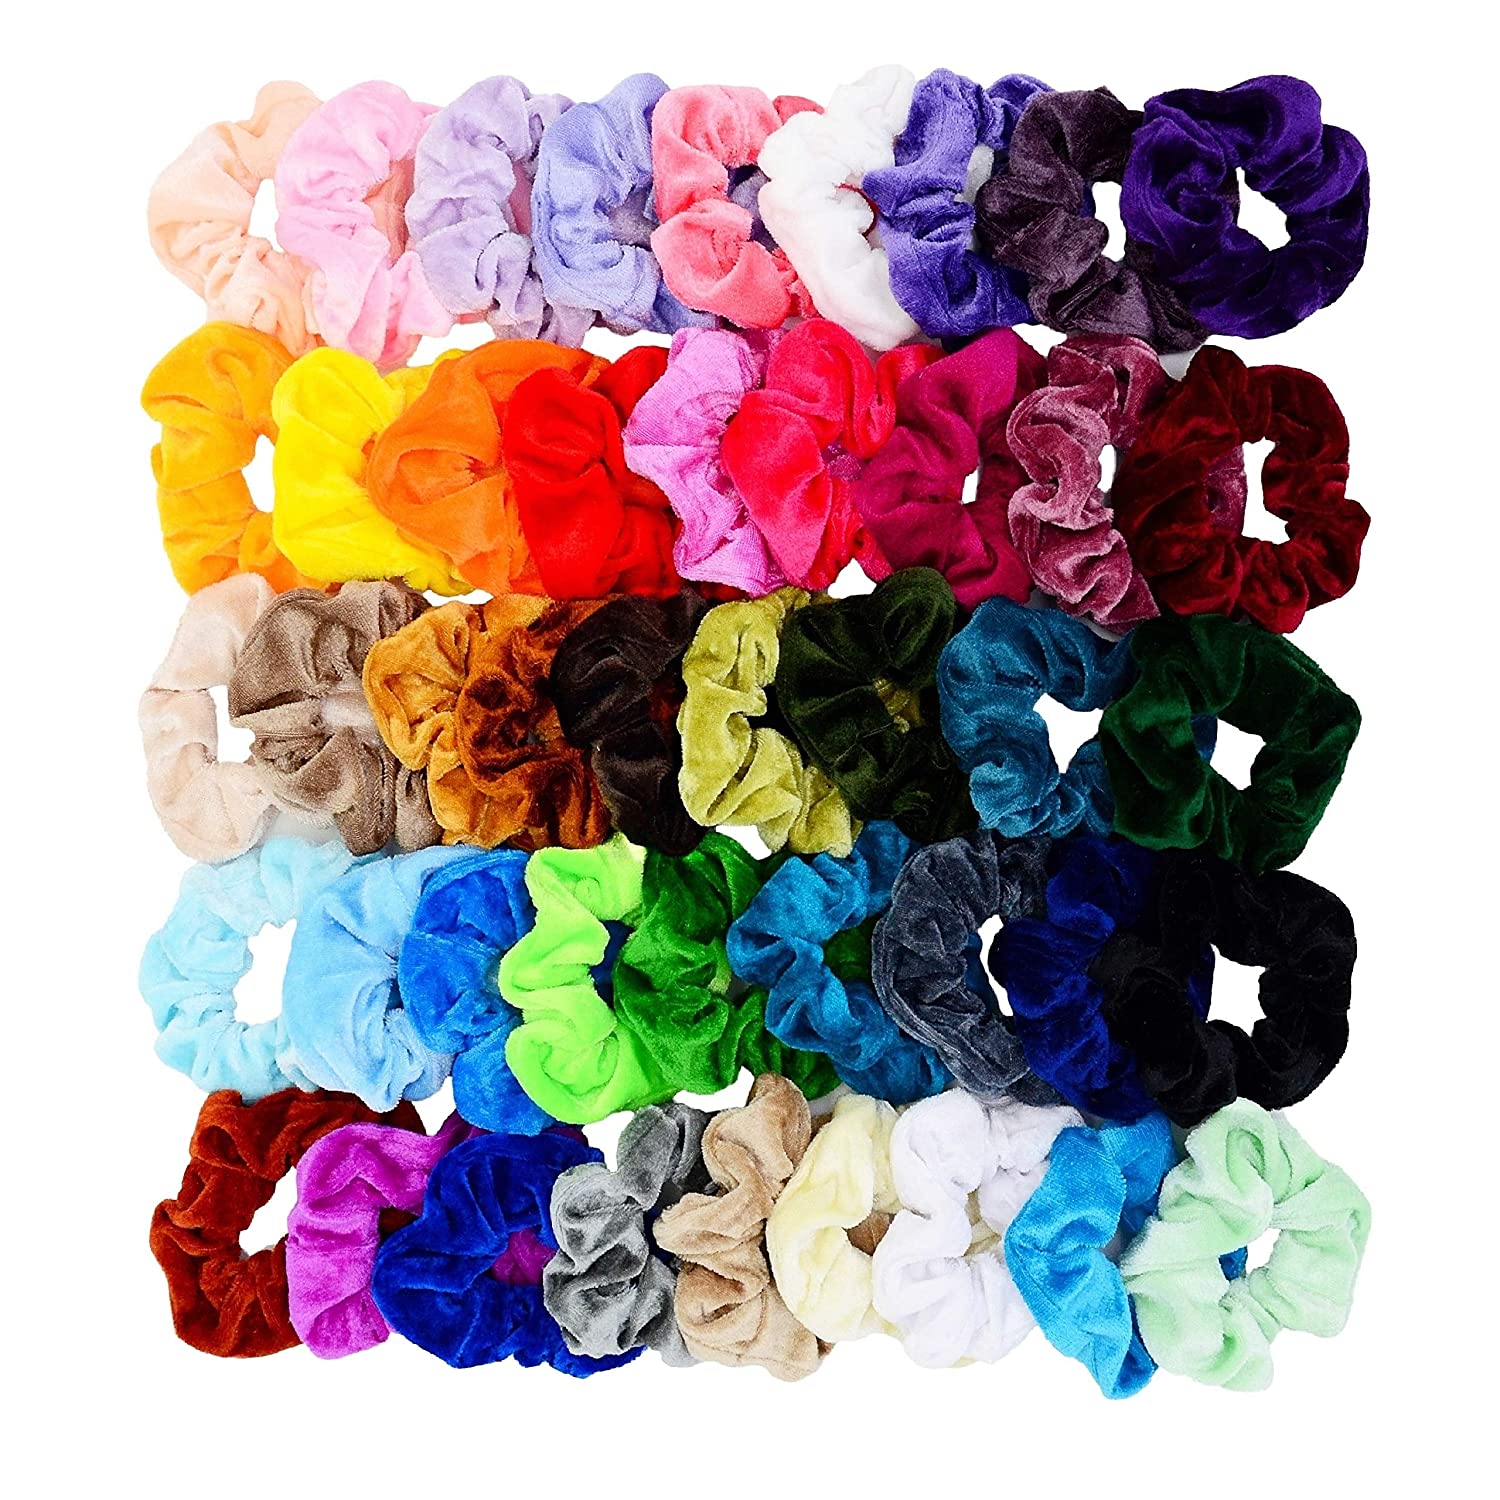 New Live All Hair Types Scrunchies, 15-Pack